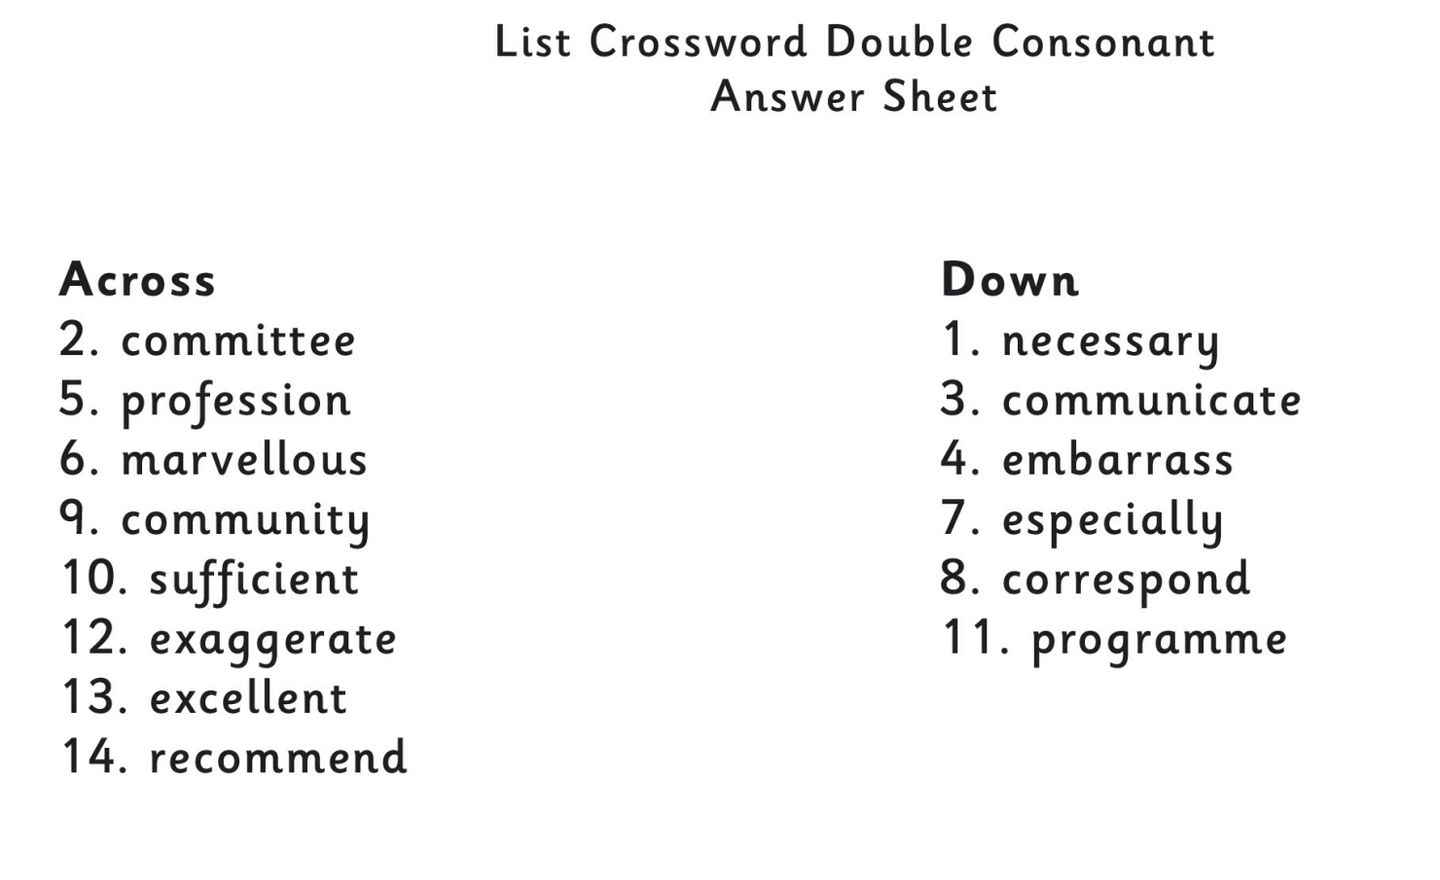 Image of Crossword spelling answers